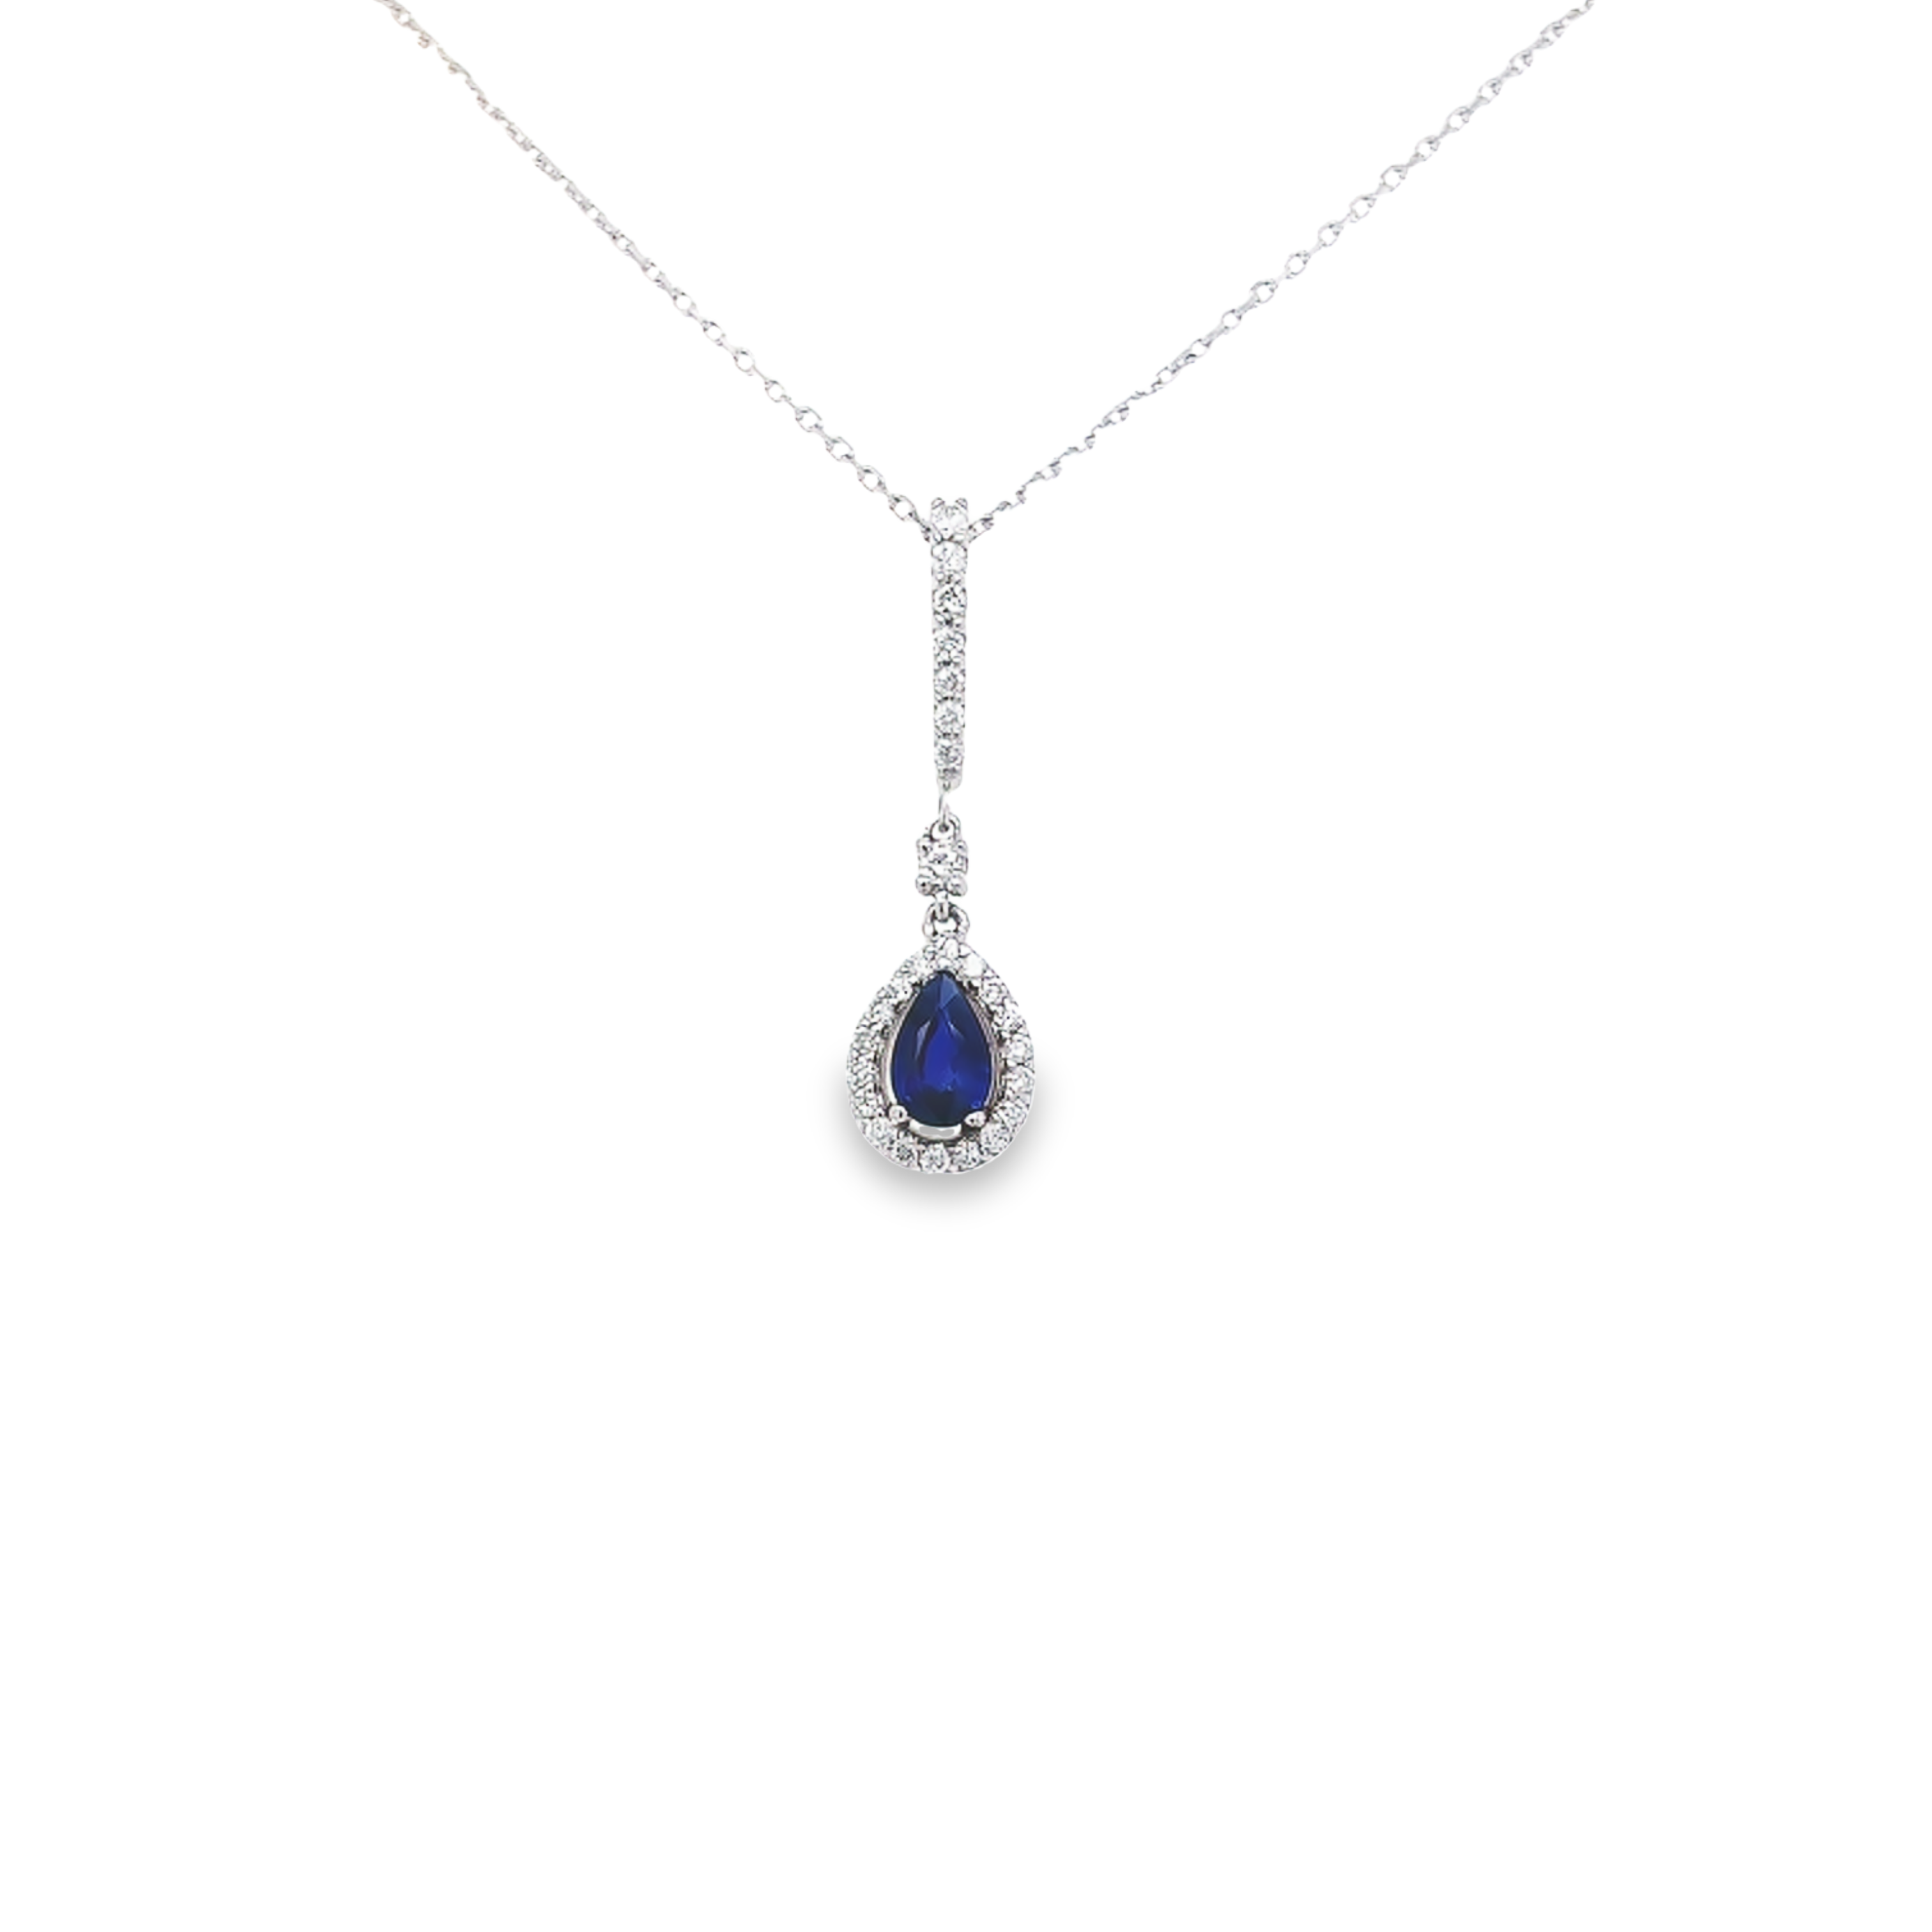 14 Karat white gold pendant with One 0.50Carat pear Sapphire and 26=0.26 total weight round brilliant G SI Diamonds